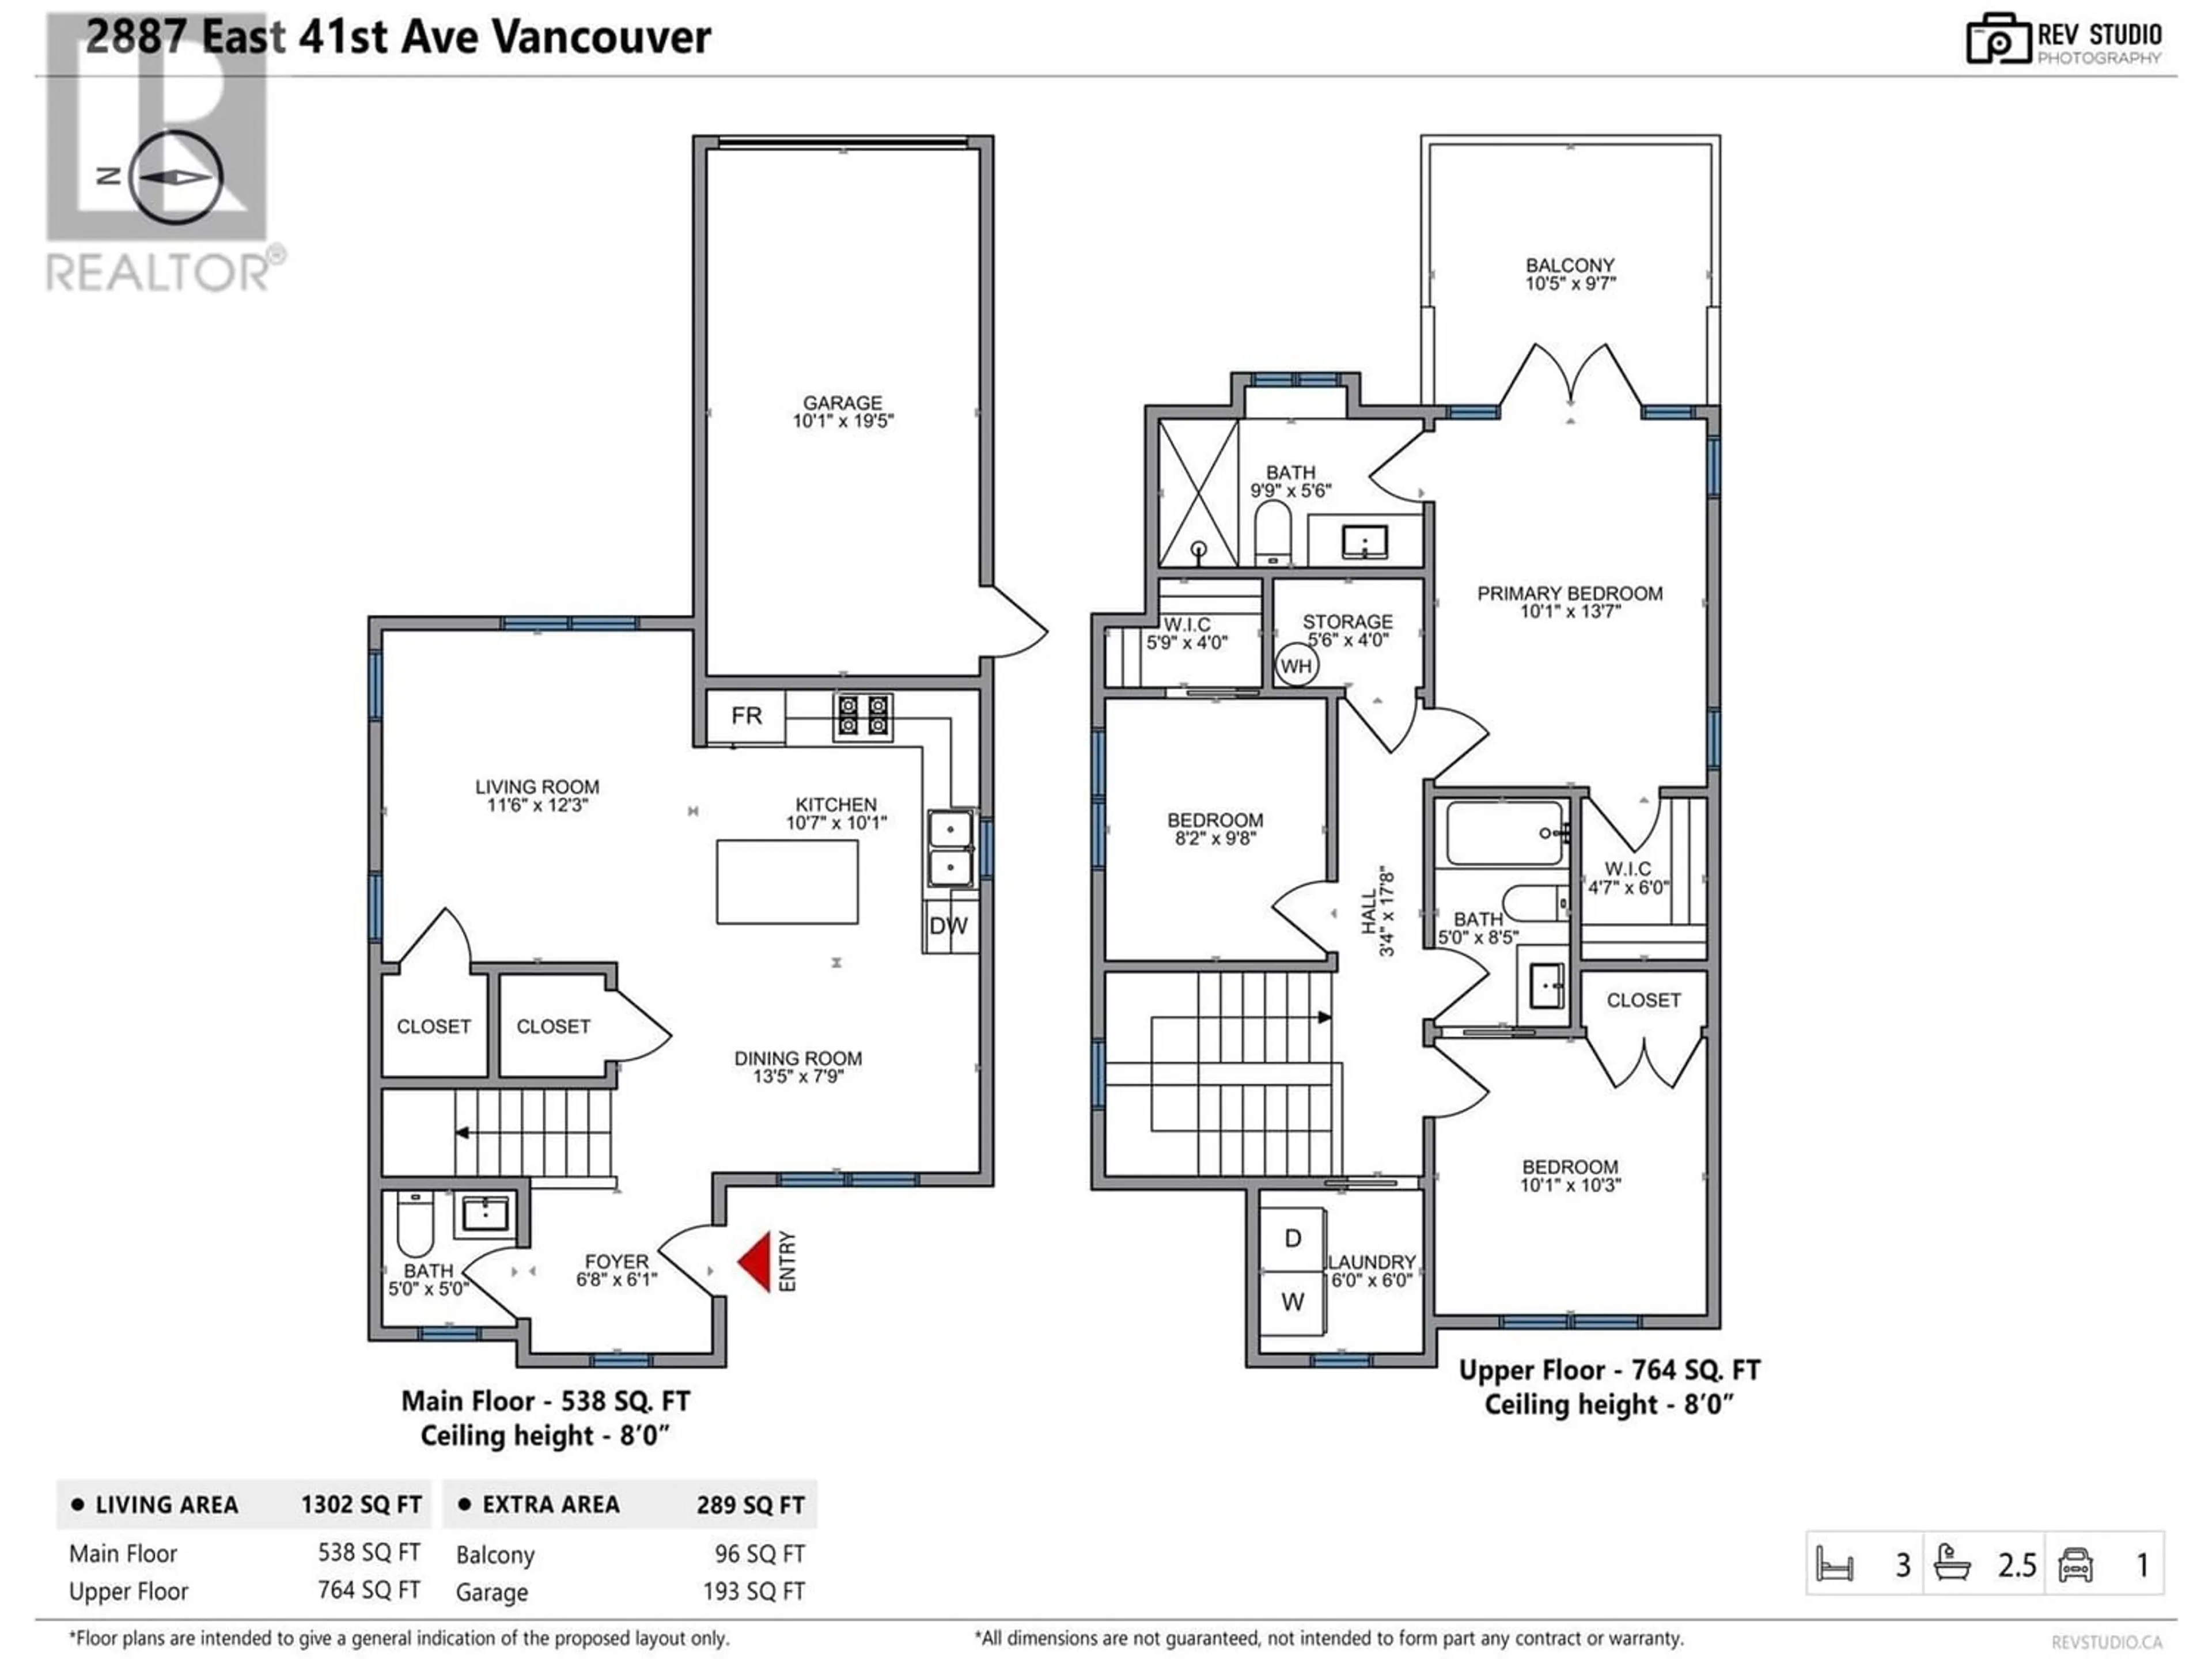 Other indoor space for 2887 E 41 AVENUE, Vancouver British Columbia V5R2X4